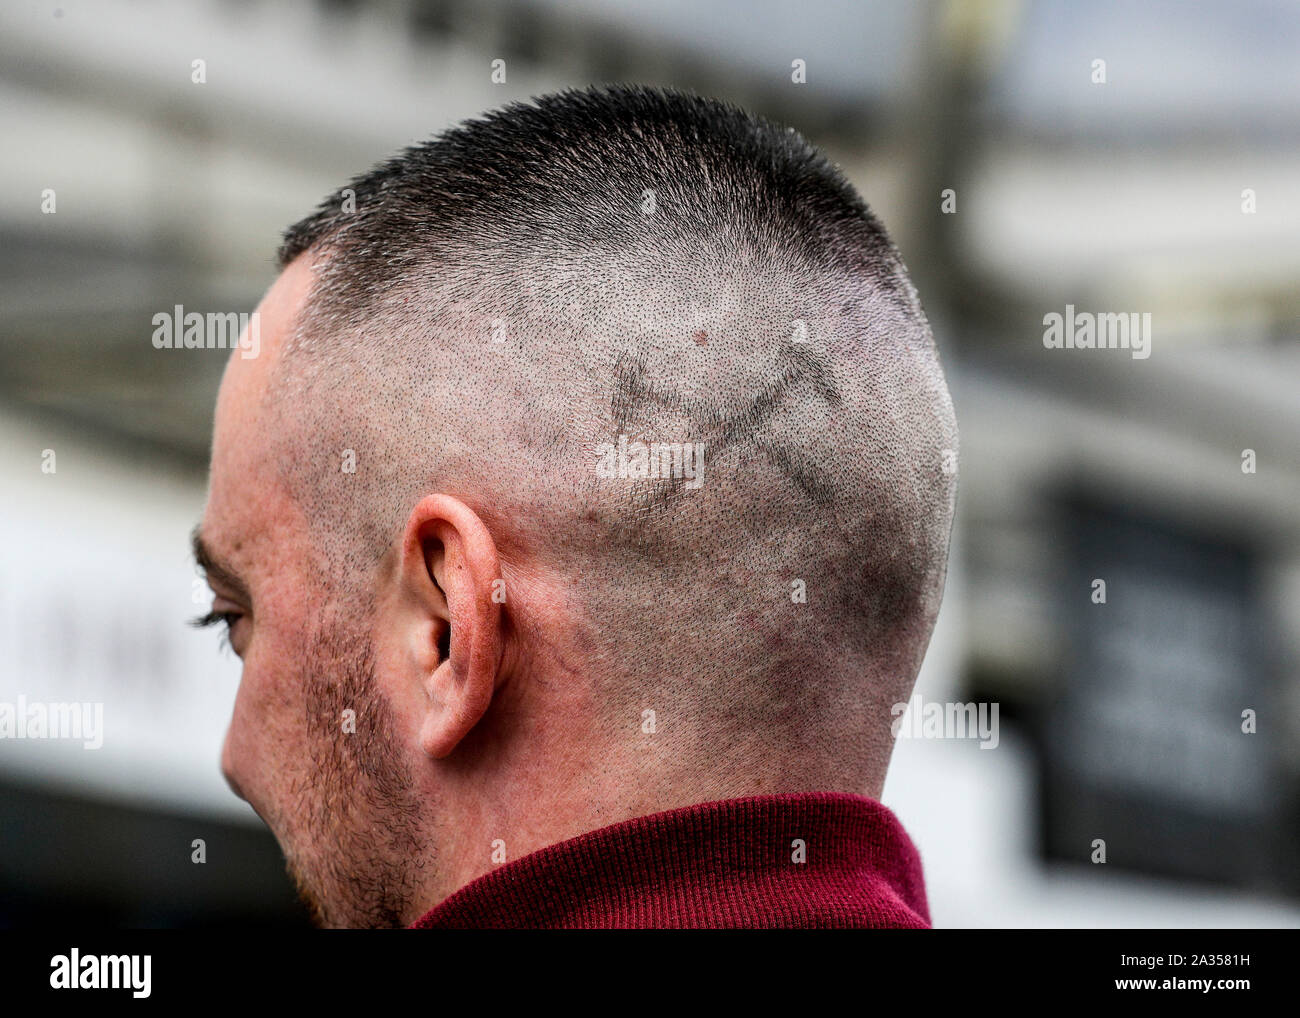 London Stadium, London, UK. 5th Oct, 2019. English Premier League Football,  West Ham United versus Crystal Palace; West Ham United fan with a shaved  Irons logo on head outside the London Stadium